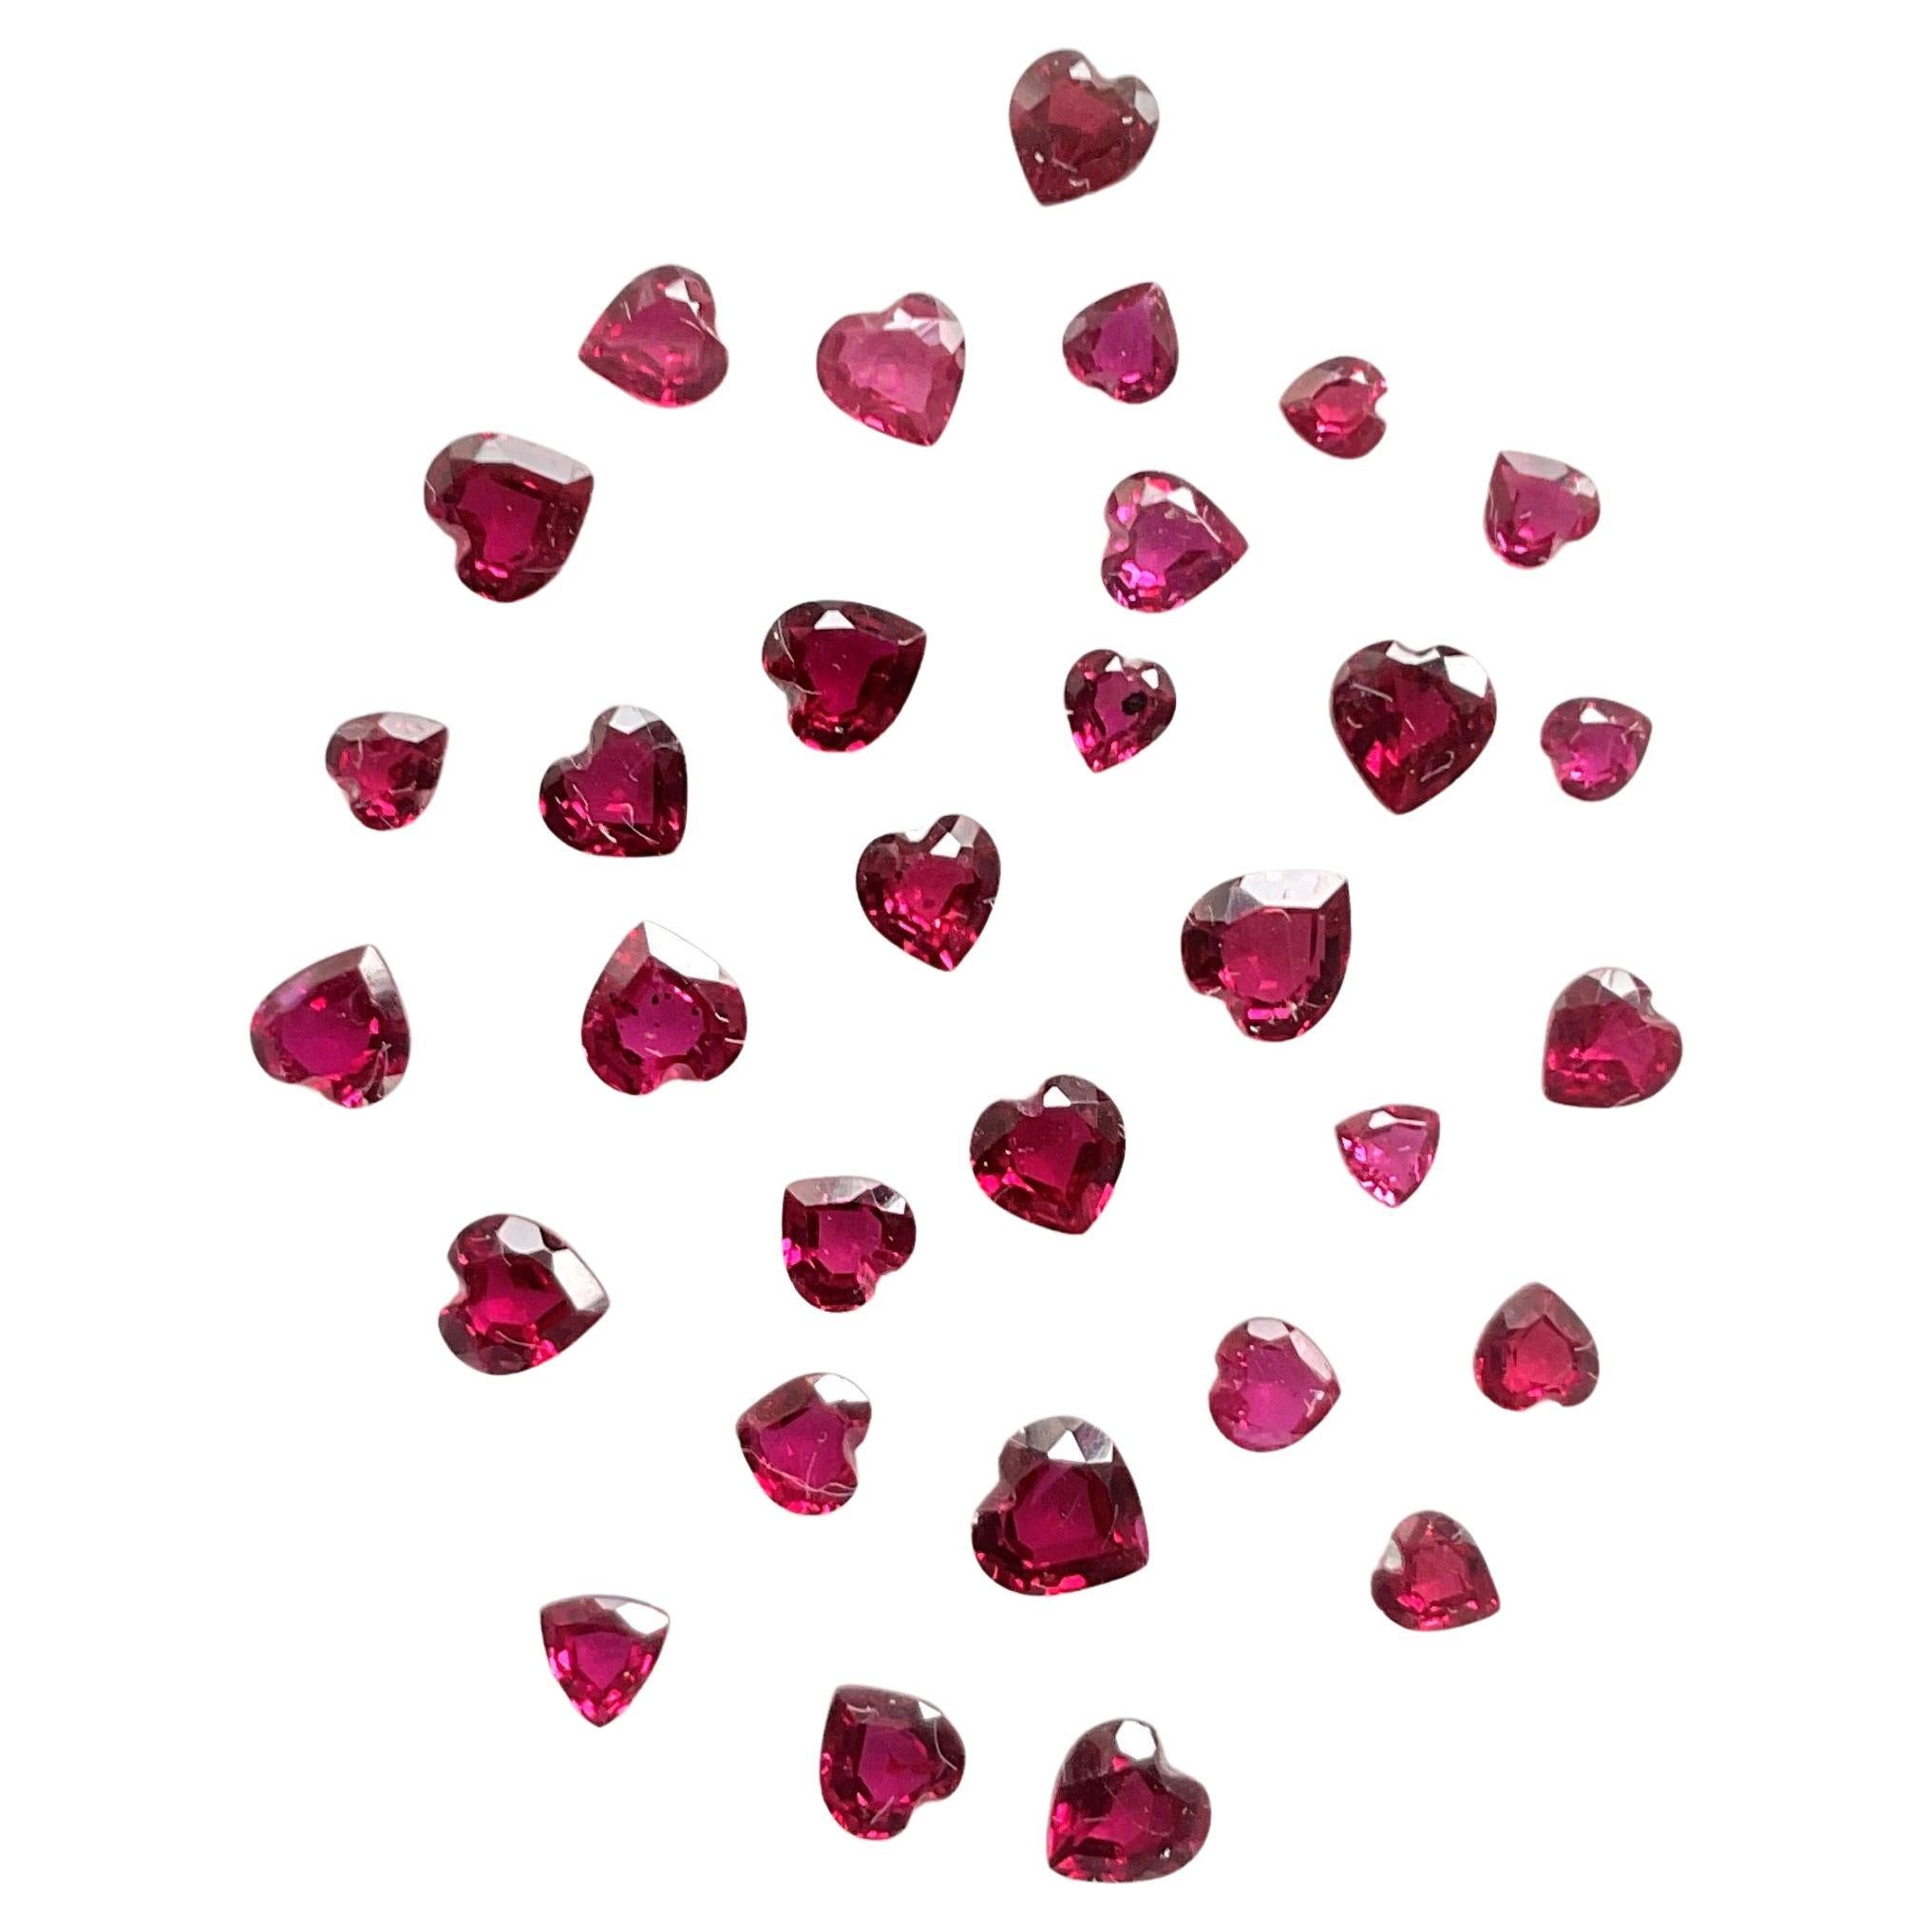 3.59 Carats Mozambique Ruby Top Quality Heart Cut stone No Heat Natural Gemstone